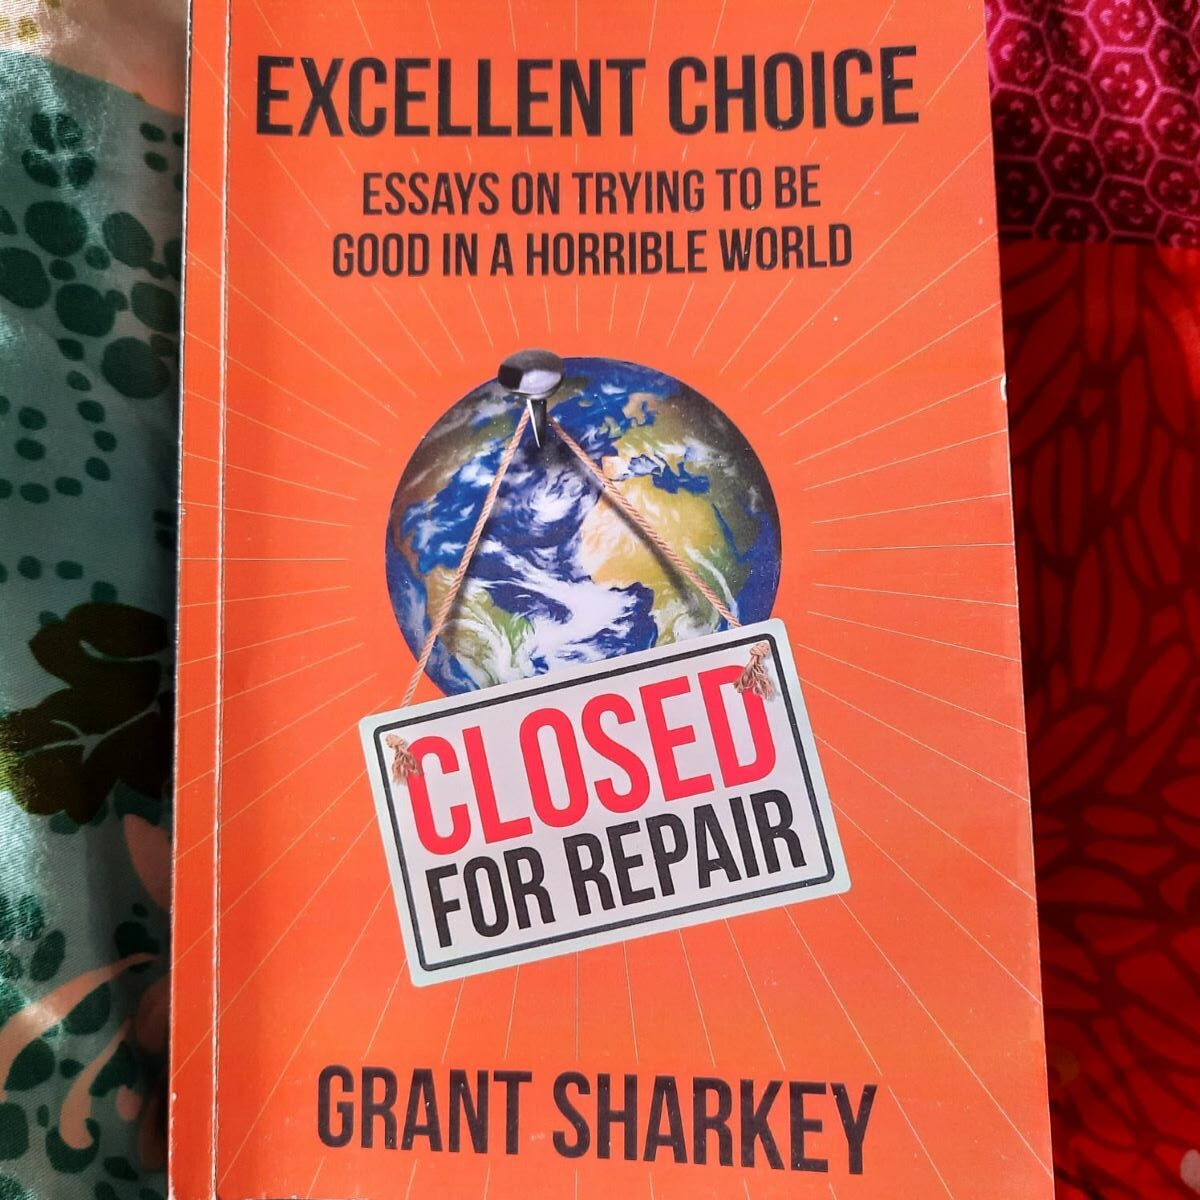 Book Review: Excellent Choice by Grant Sharkey